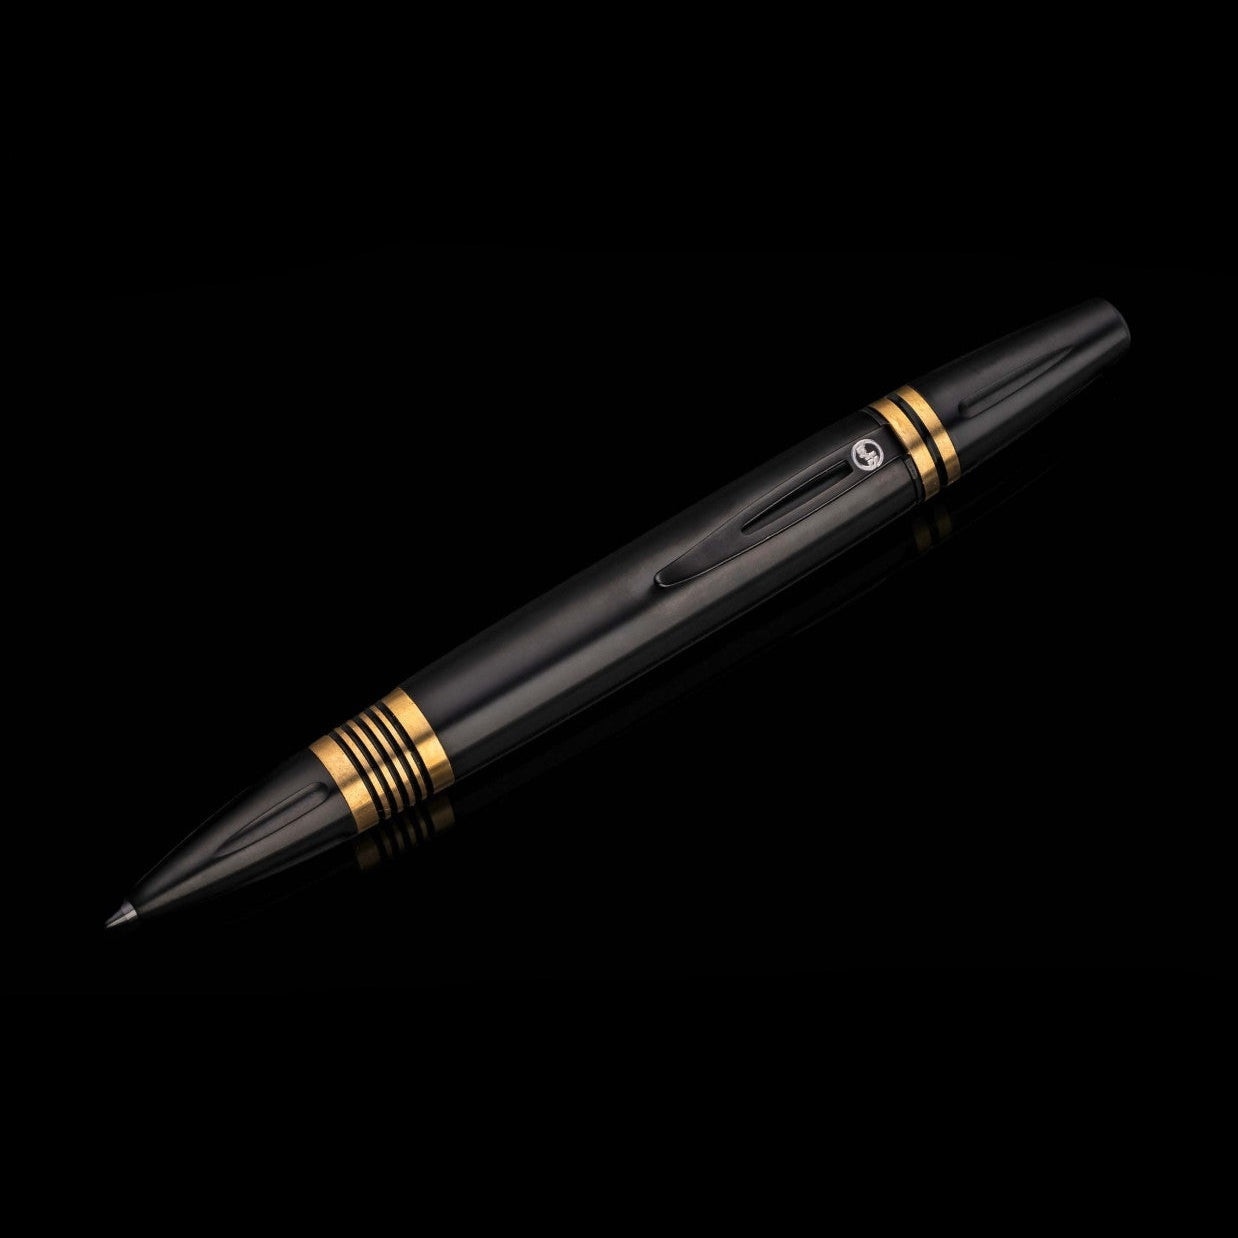 William Henry Caribe 11 Writing Instrument-Home/Giftware-Kevin's Fine Outdoor Gear & Apparel